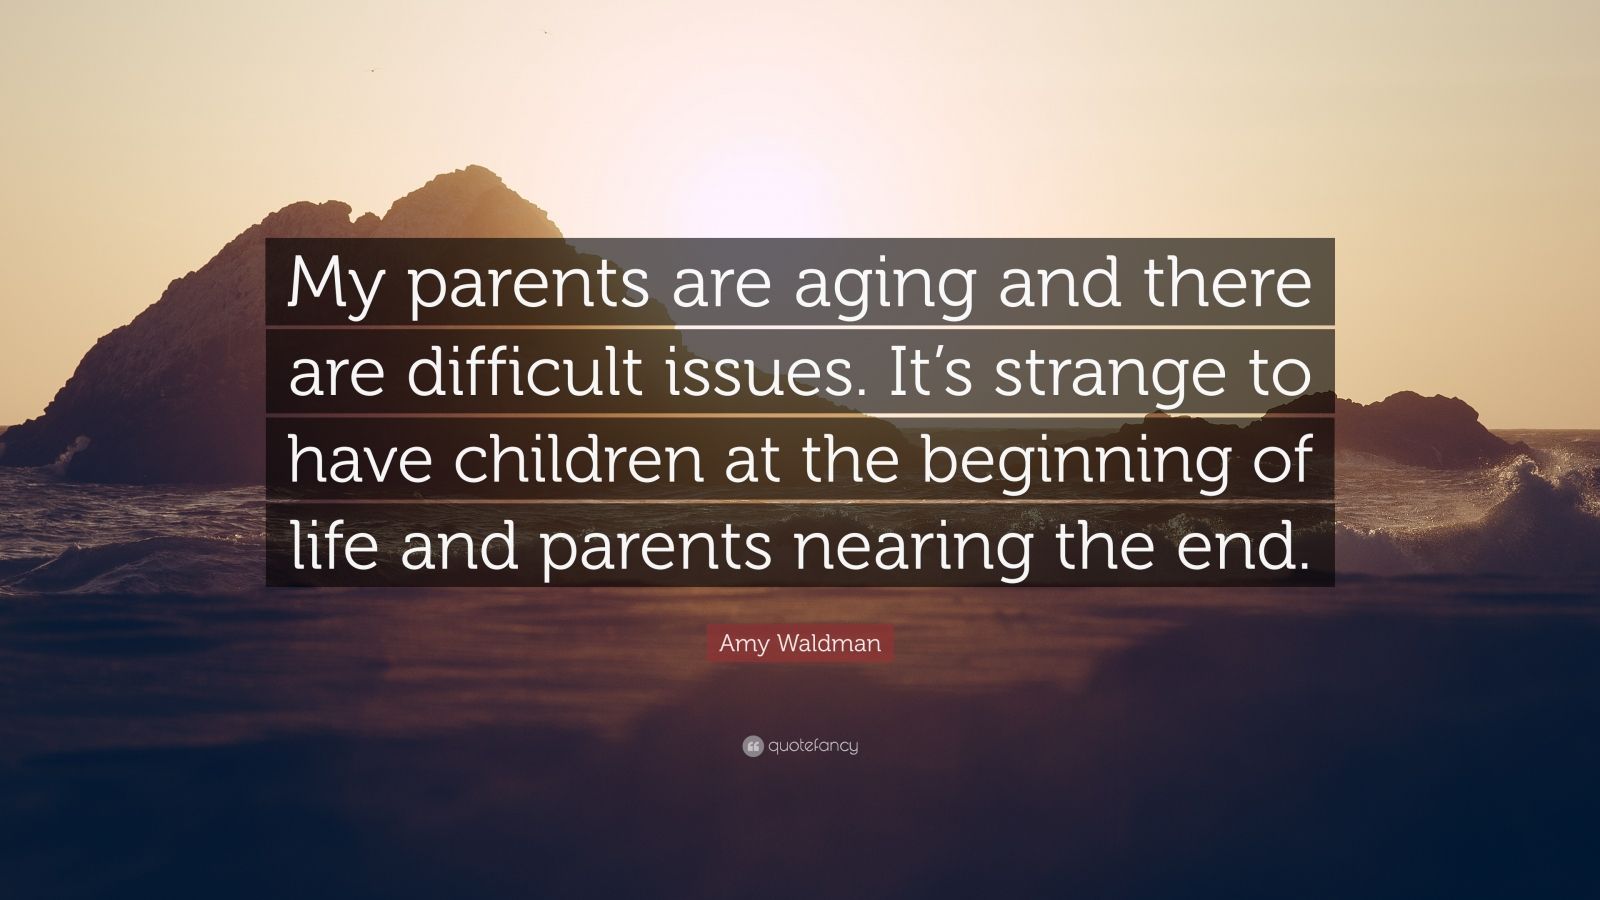 Amy Waldman Quote “My parents are aging and there are